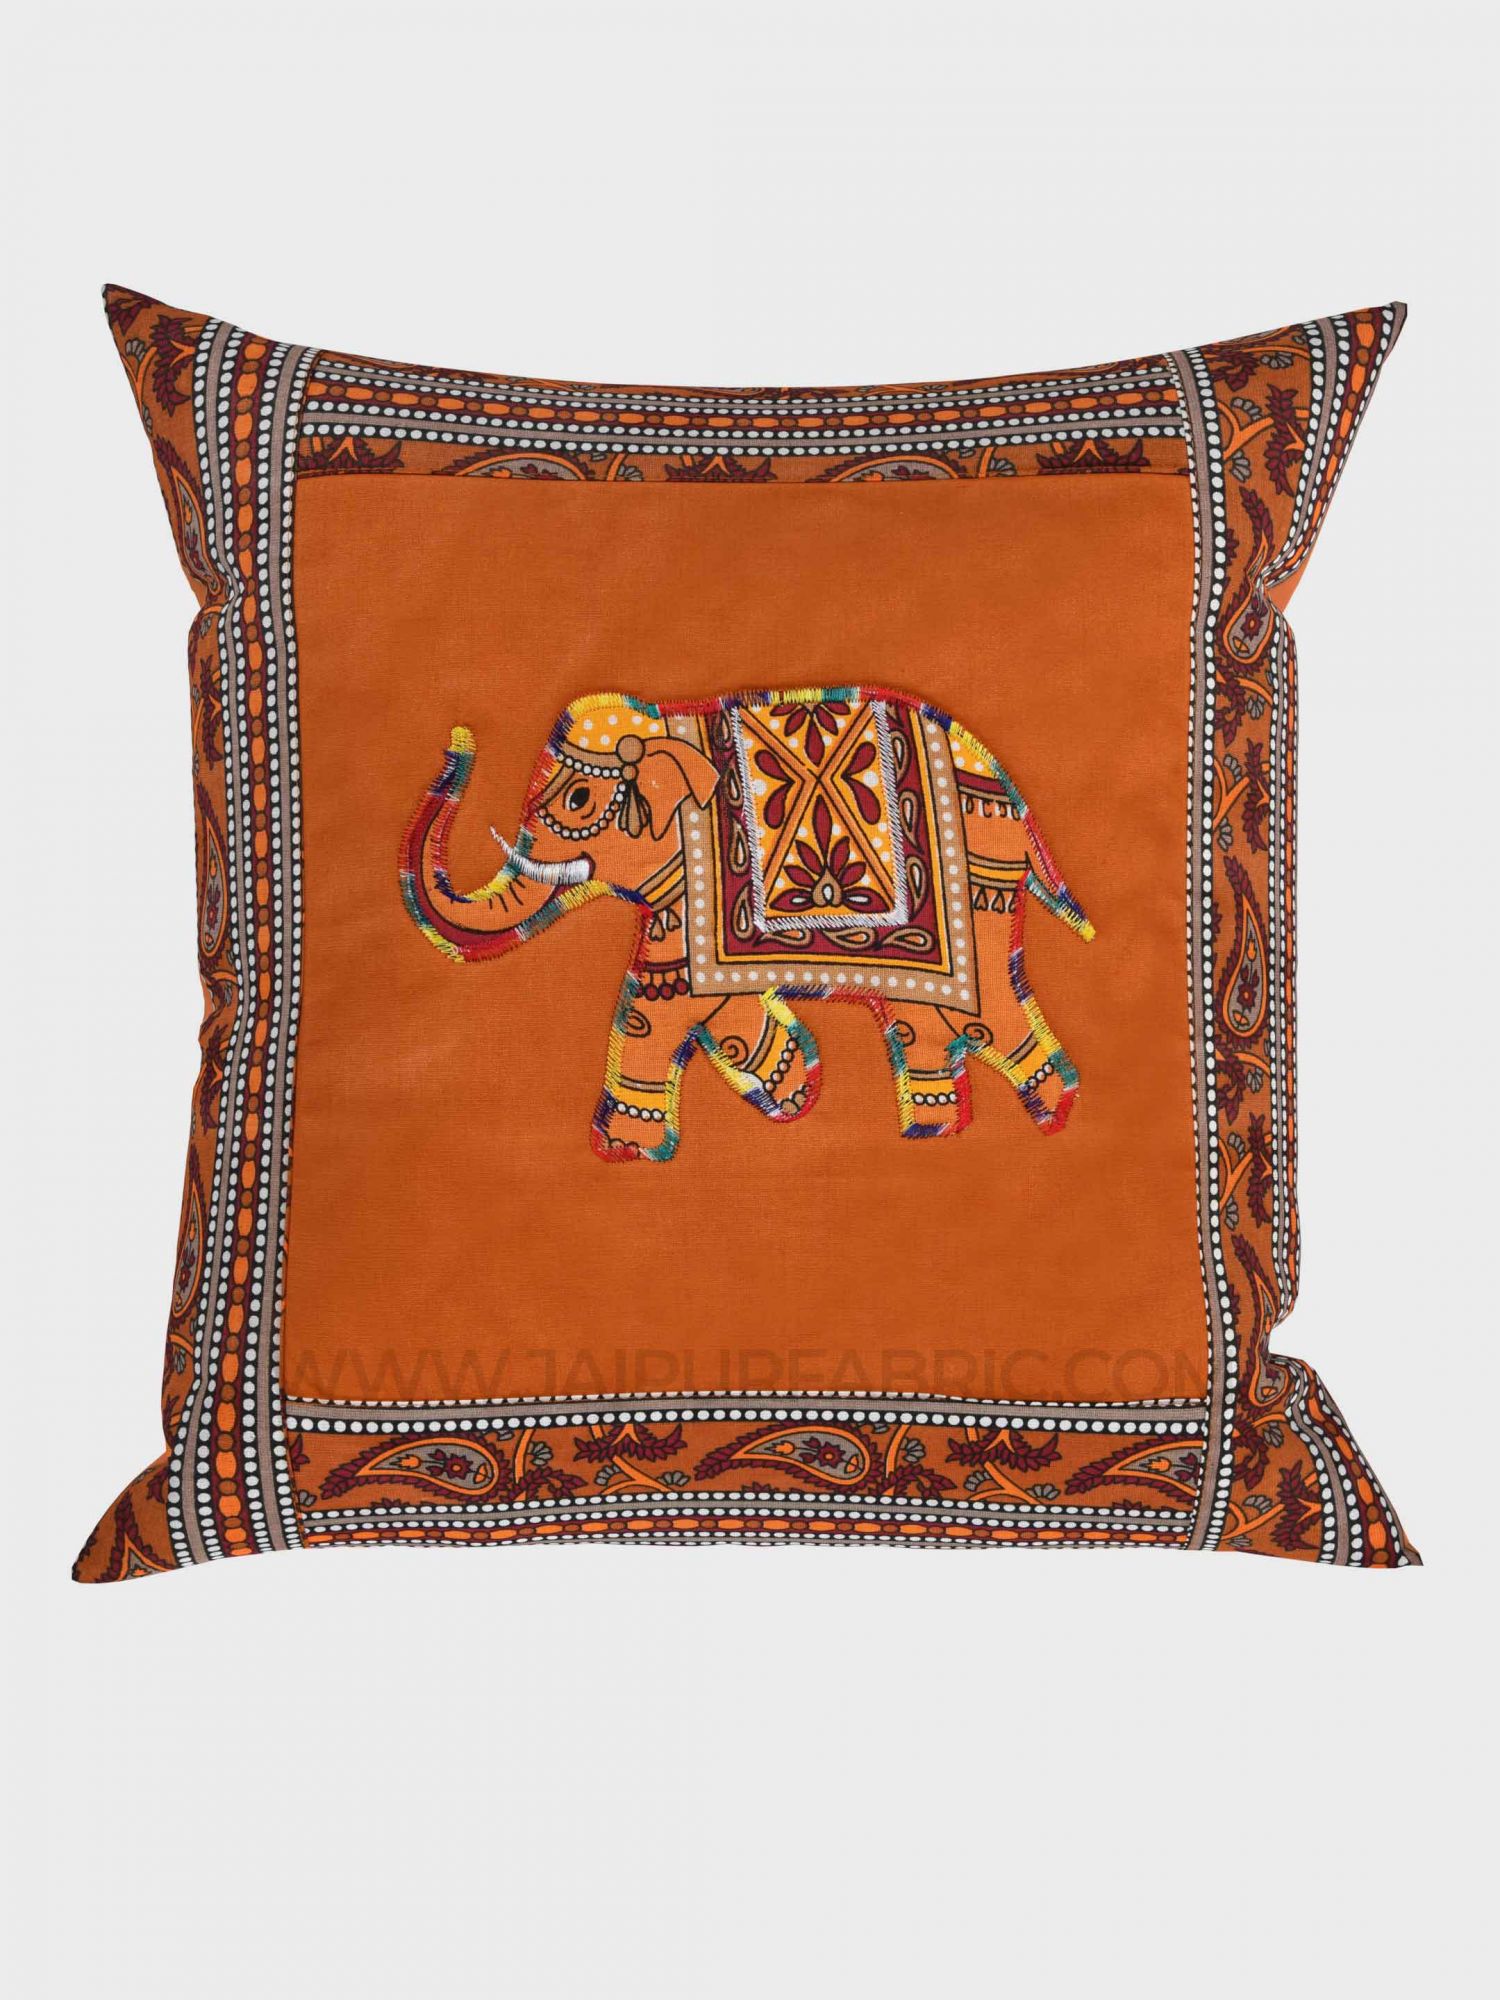 Applique Mustard Elephant Jaipuri Hand Made Embroidery Patch Work Cushion Cover